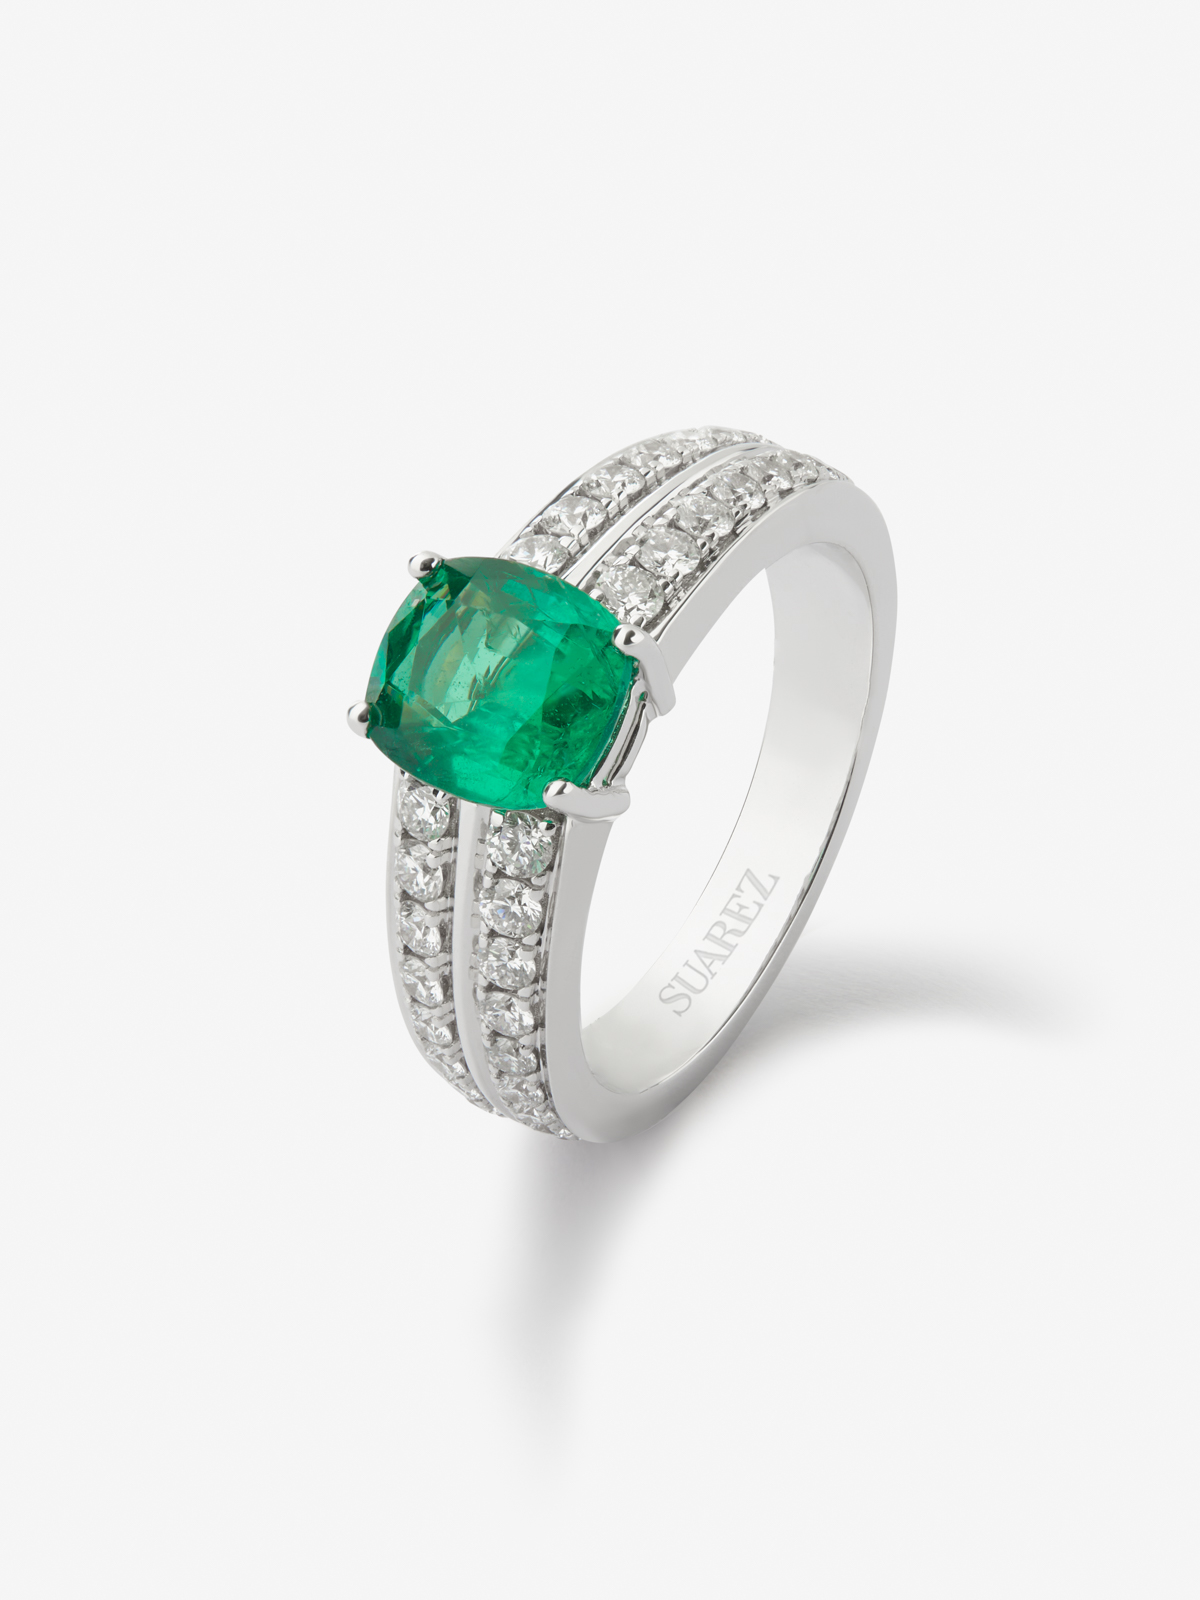 18K white gold ring with cushion-cut emerald of 1,563 cts and 36 brilliant-cut diamonds with a total of 0.64 cts